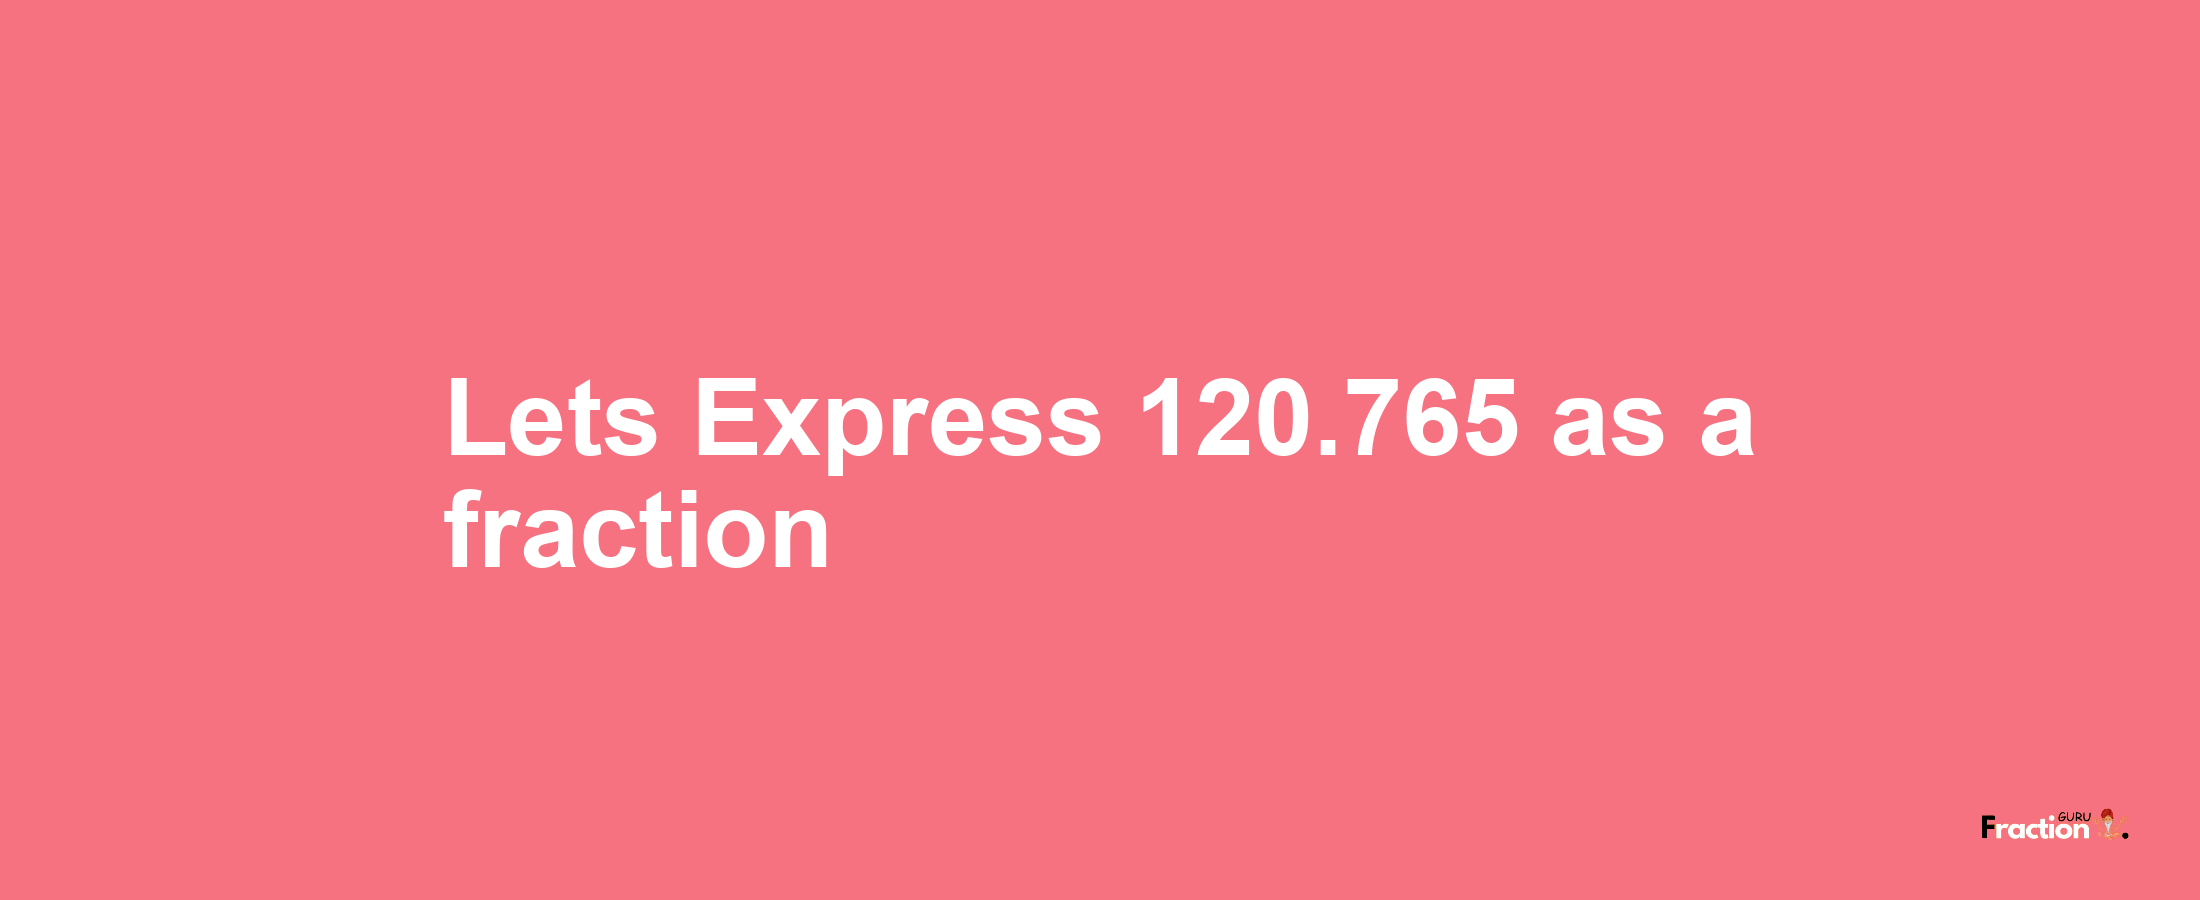 Lets Express 120.765 as afraction